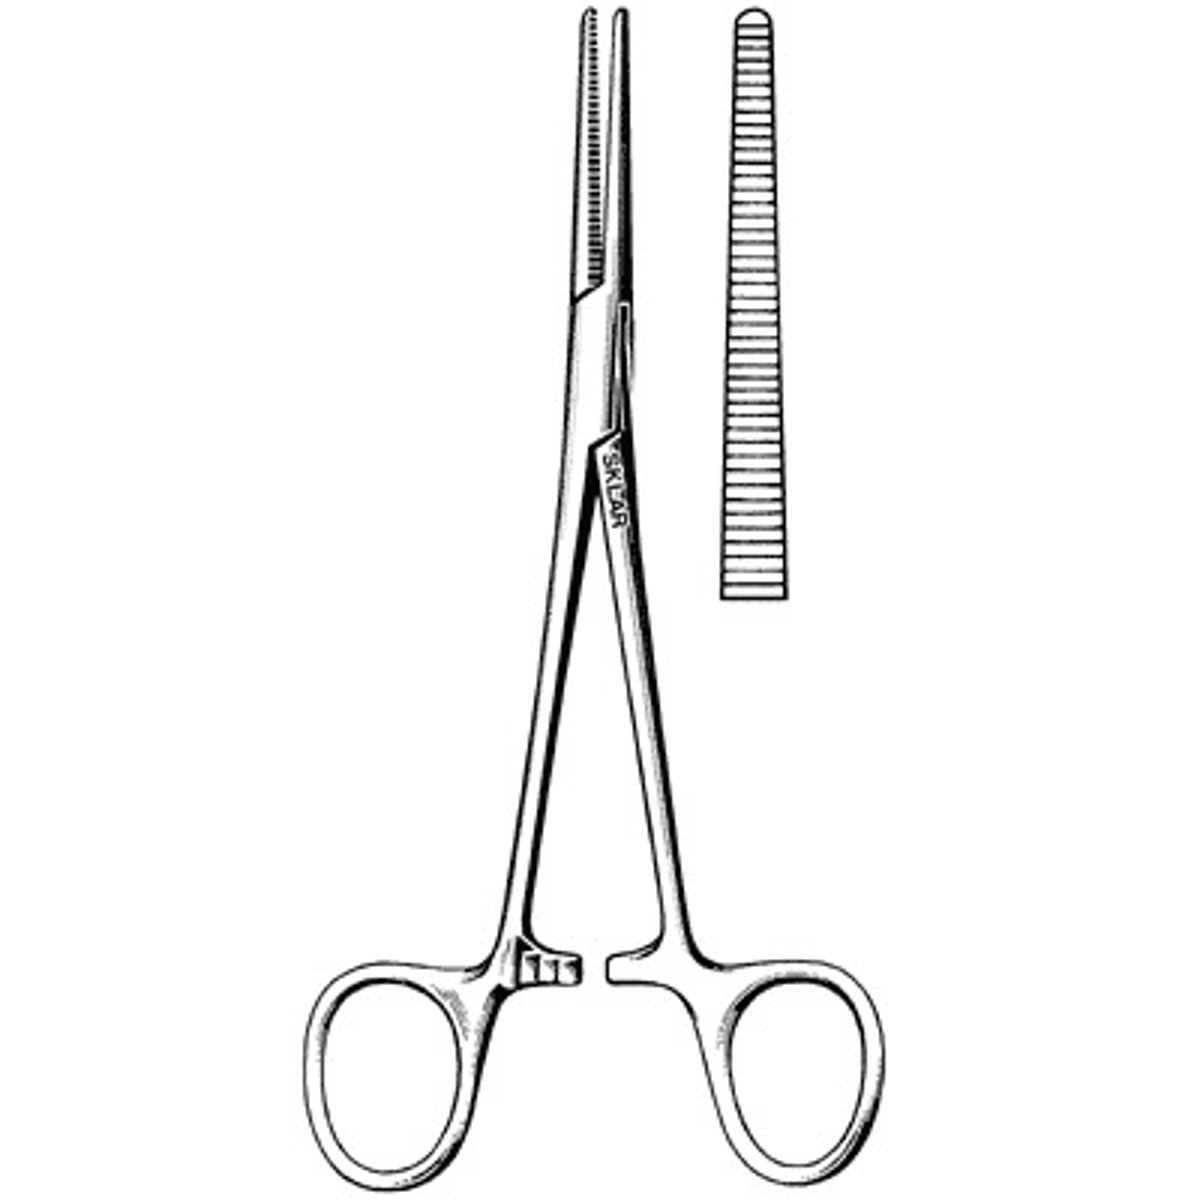 <p>Surgical instruments used to control flow of blood</p>